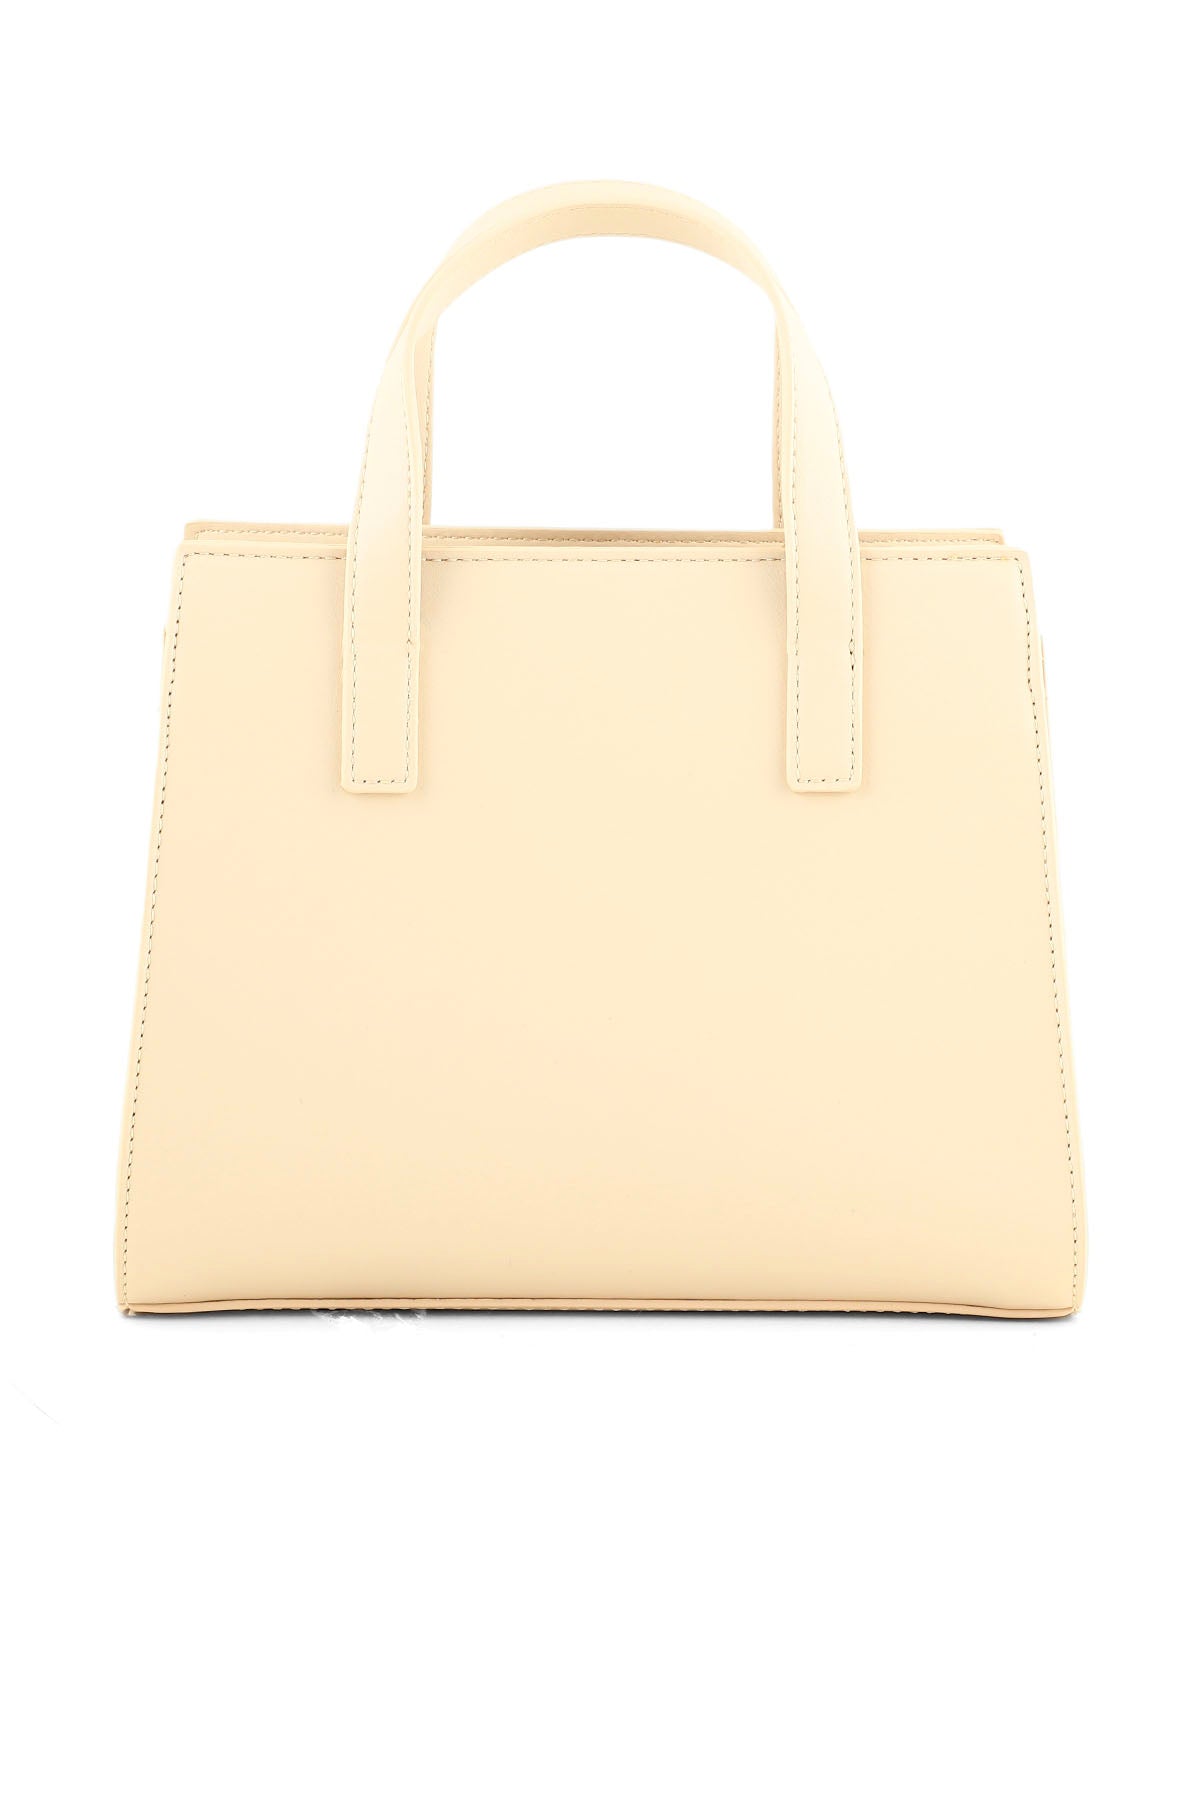 Formal Tote Hand Bags B15016-Fawn